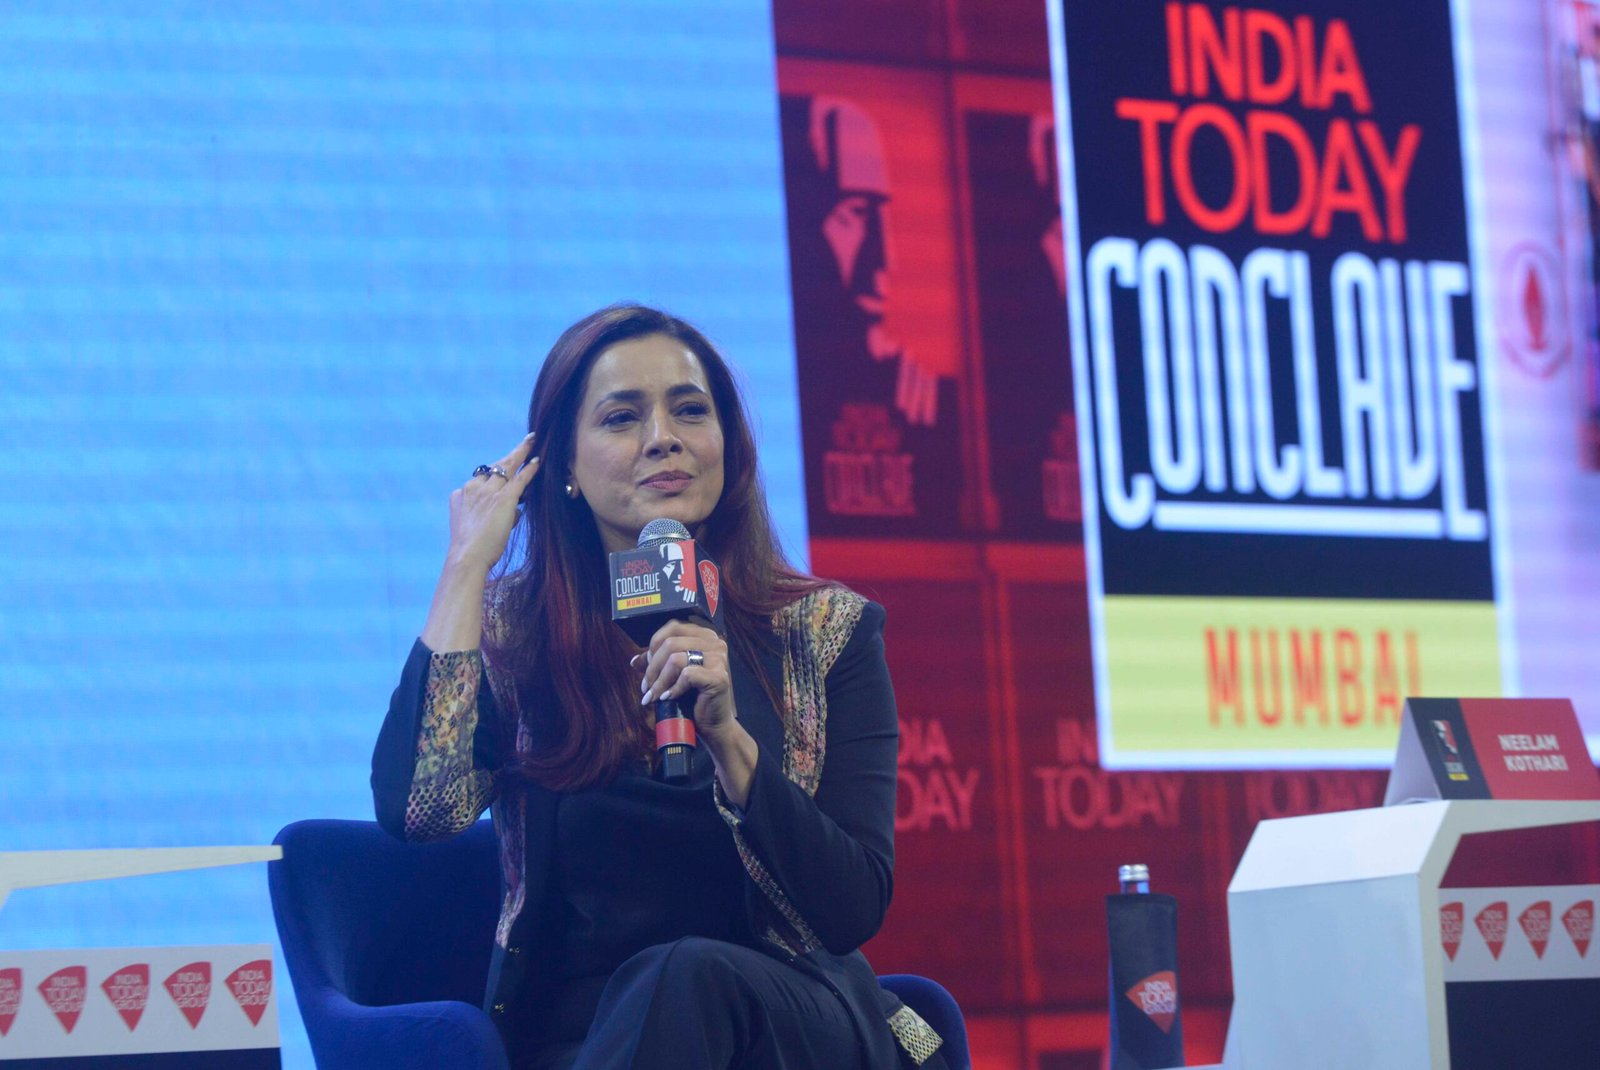 Neelam Kothari at India Today Conclave 2022 says ‘men can’t pull off a show like Fabulous Lives’